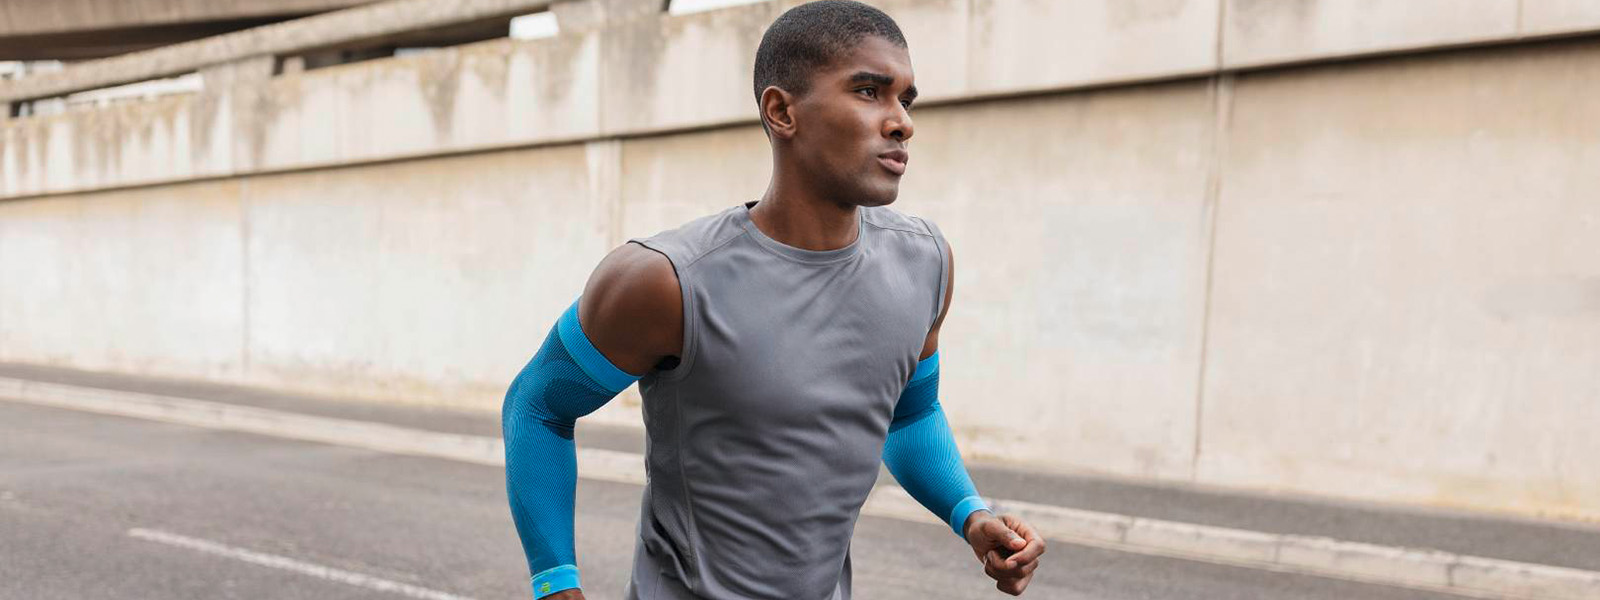 Man jogs in the city and has blue compression arm sleeves